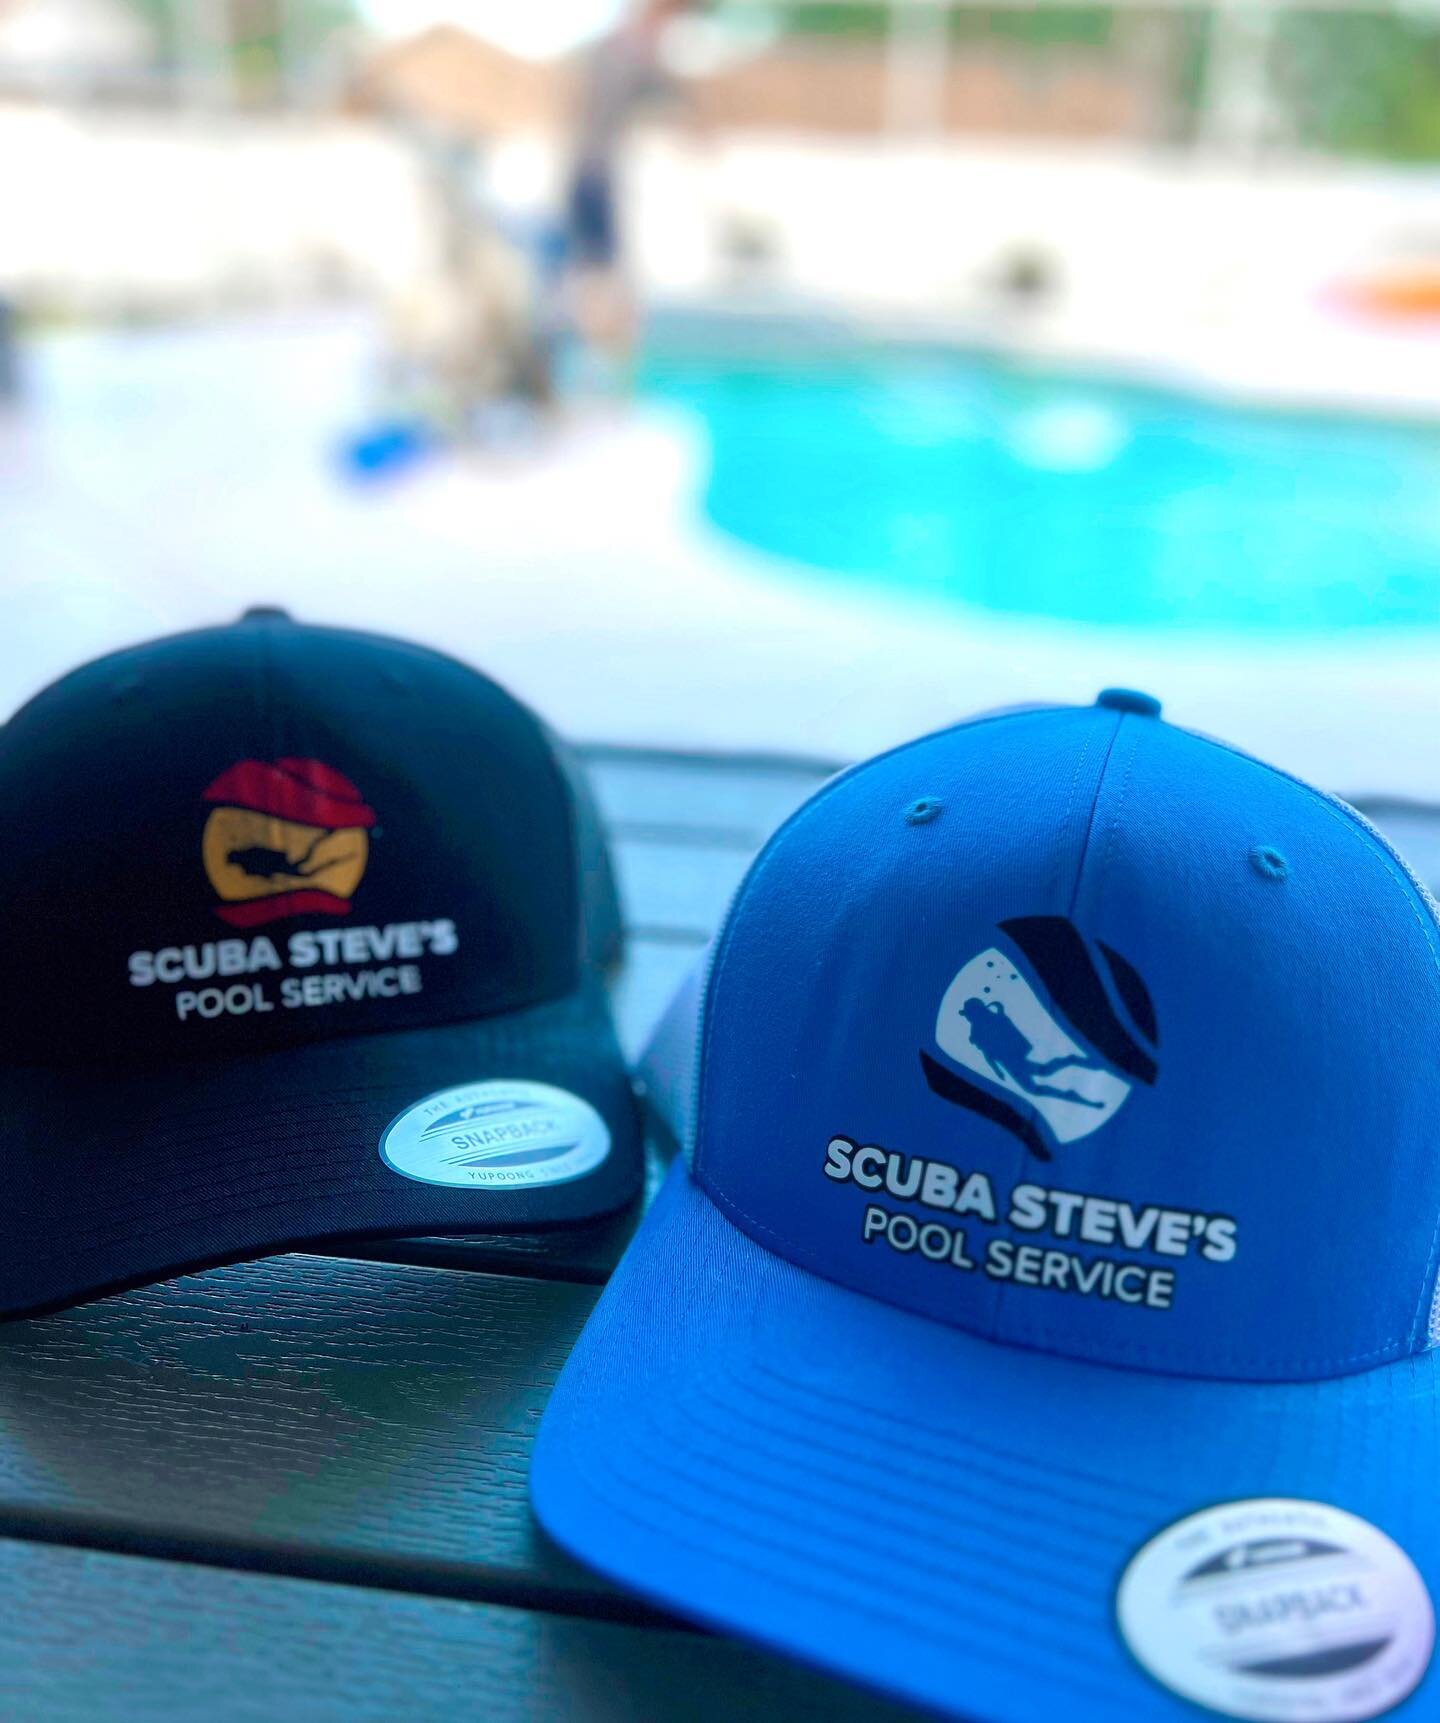 Hat Goelz 🧢 
Thanks for coming to me for all your small business needs @scubastevespoolservices ! If you live in the Orlando area, Scuba Steve is your guy to keep your pool perfect all year long! Can&rsquo;t recommend him enough! Peep 👀 him in the 